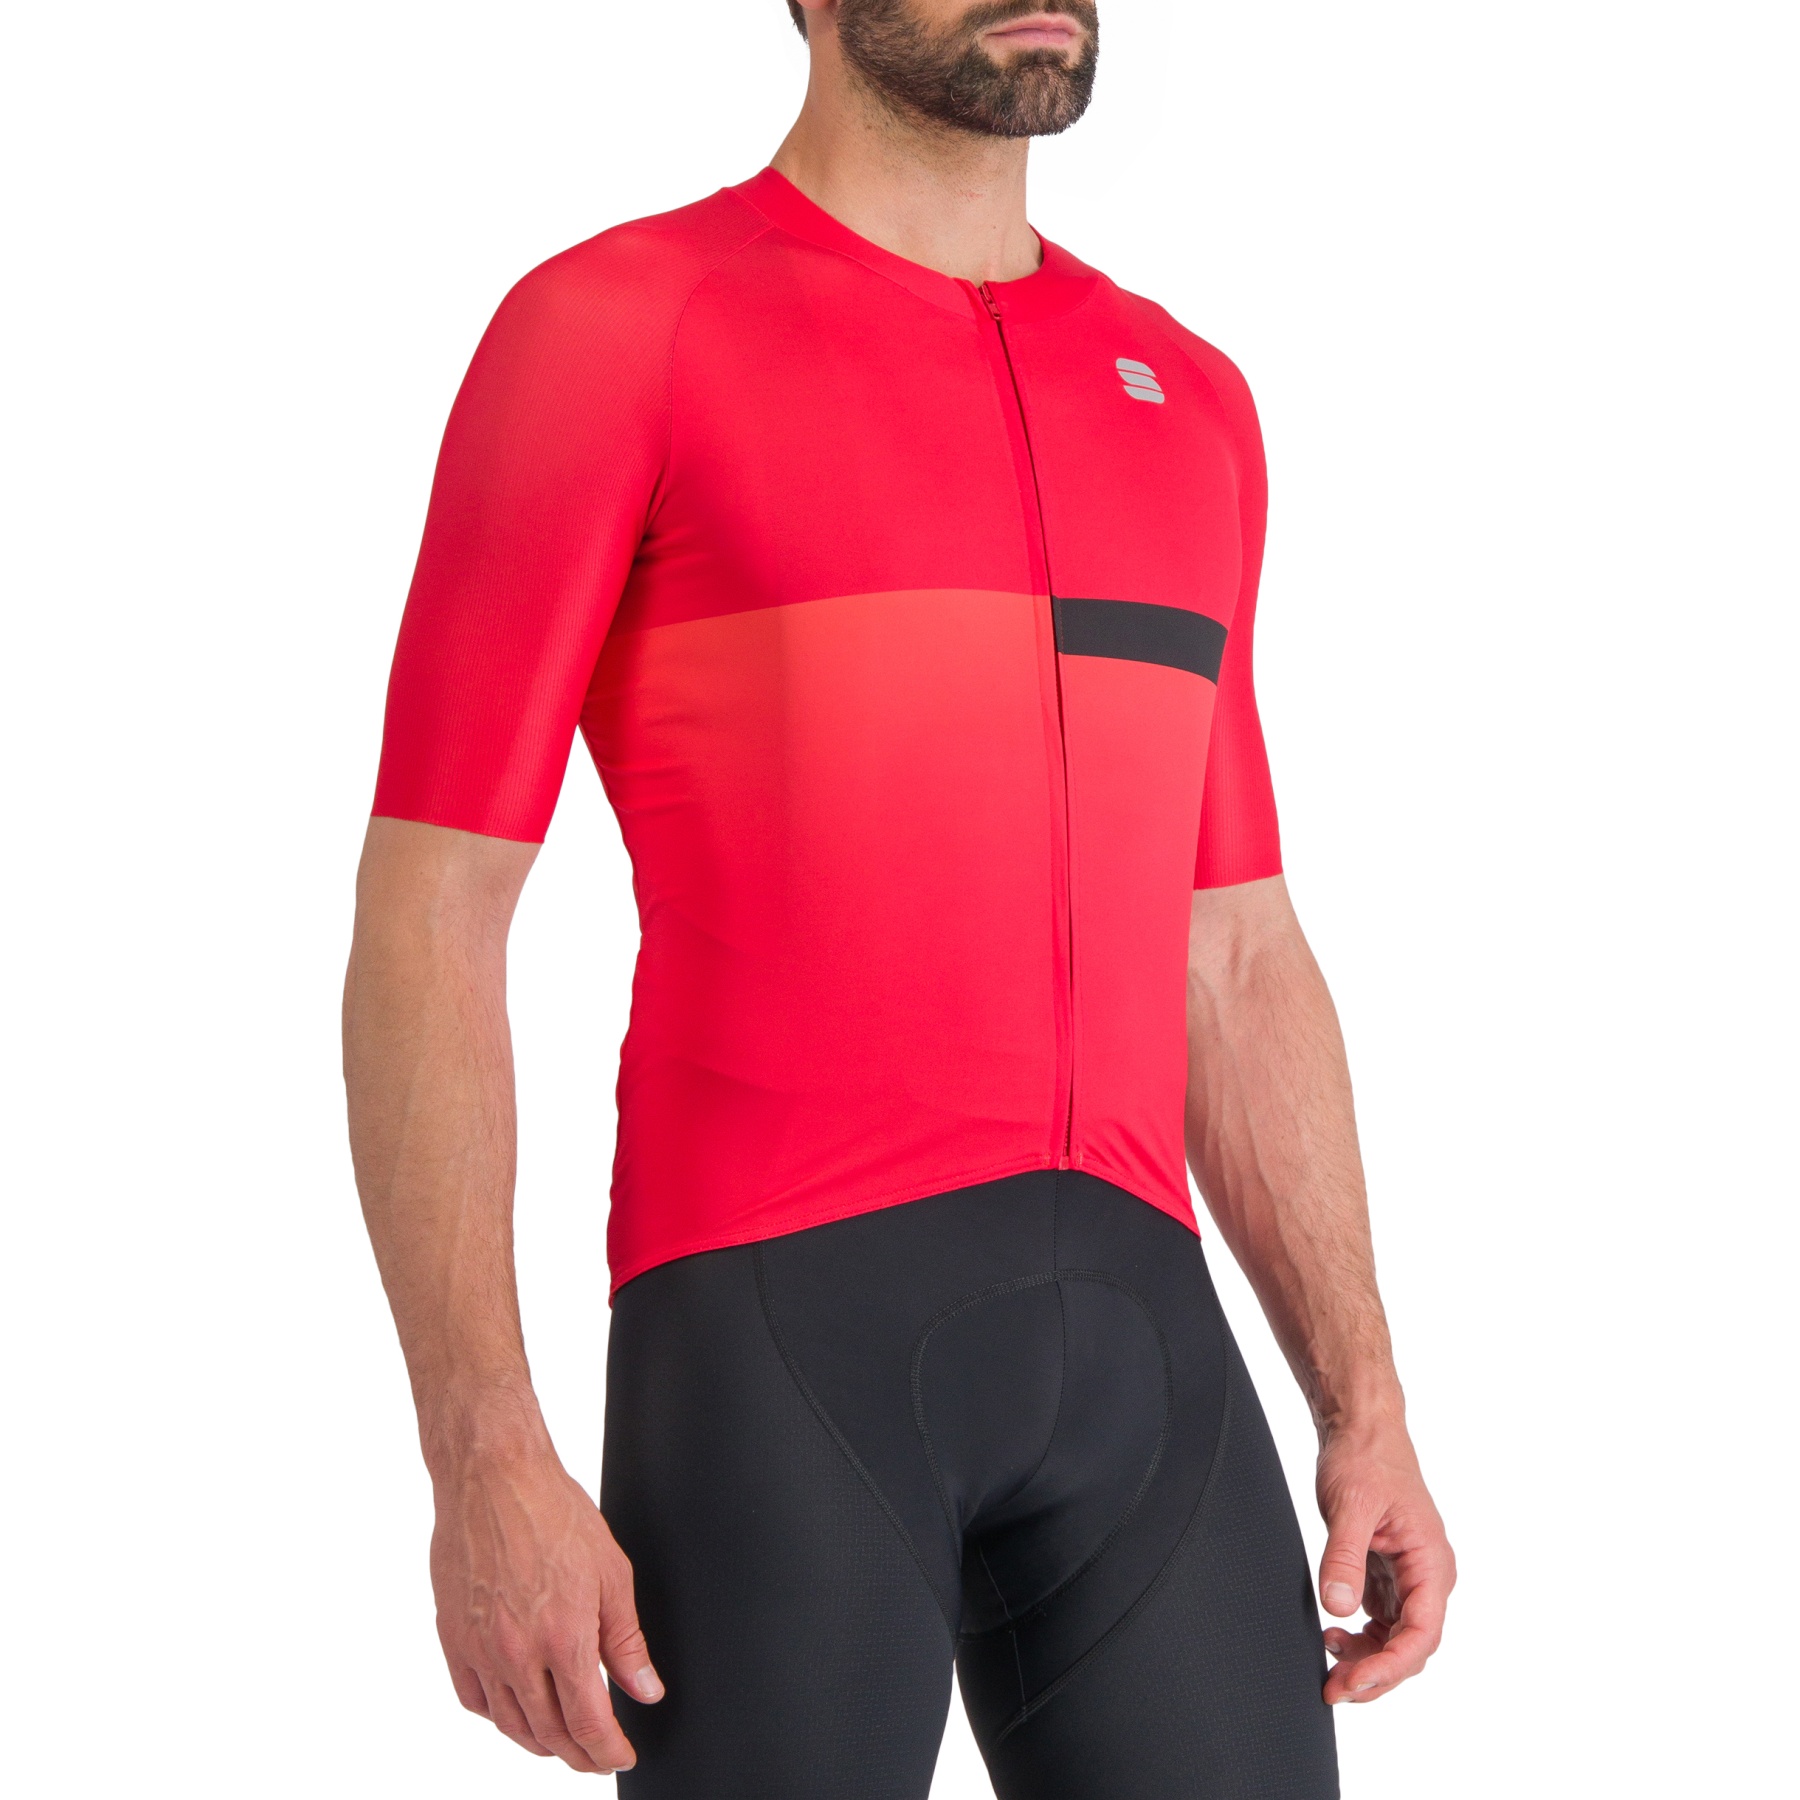 Picture of Sportful Bomber Jersey Men - 638 Red